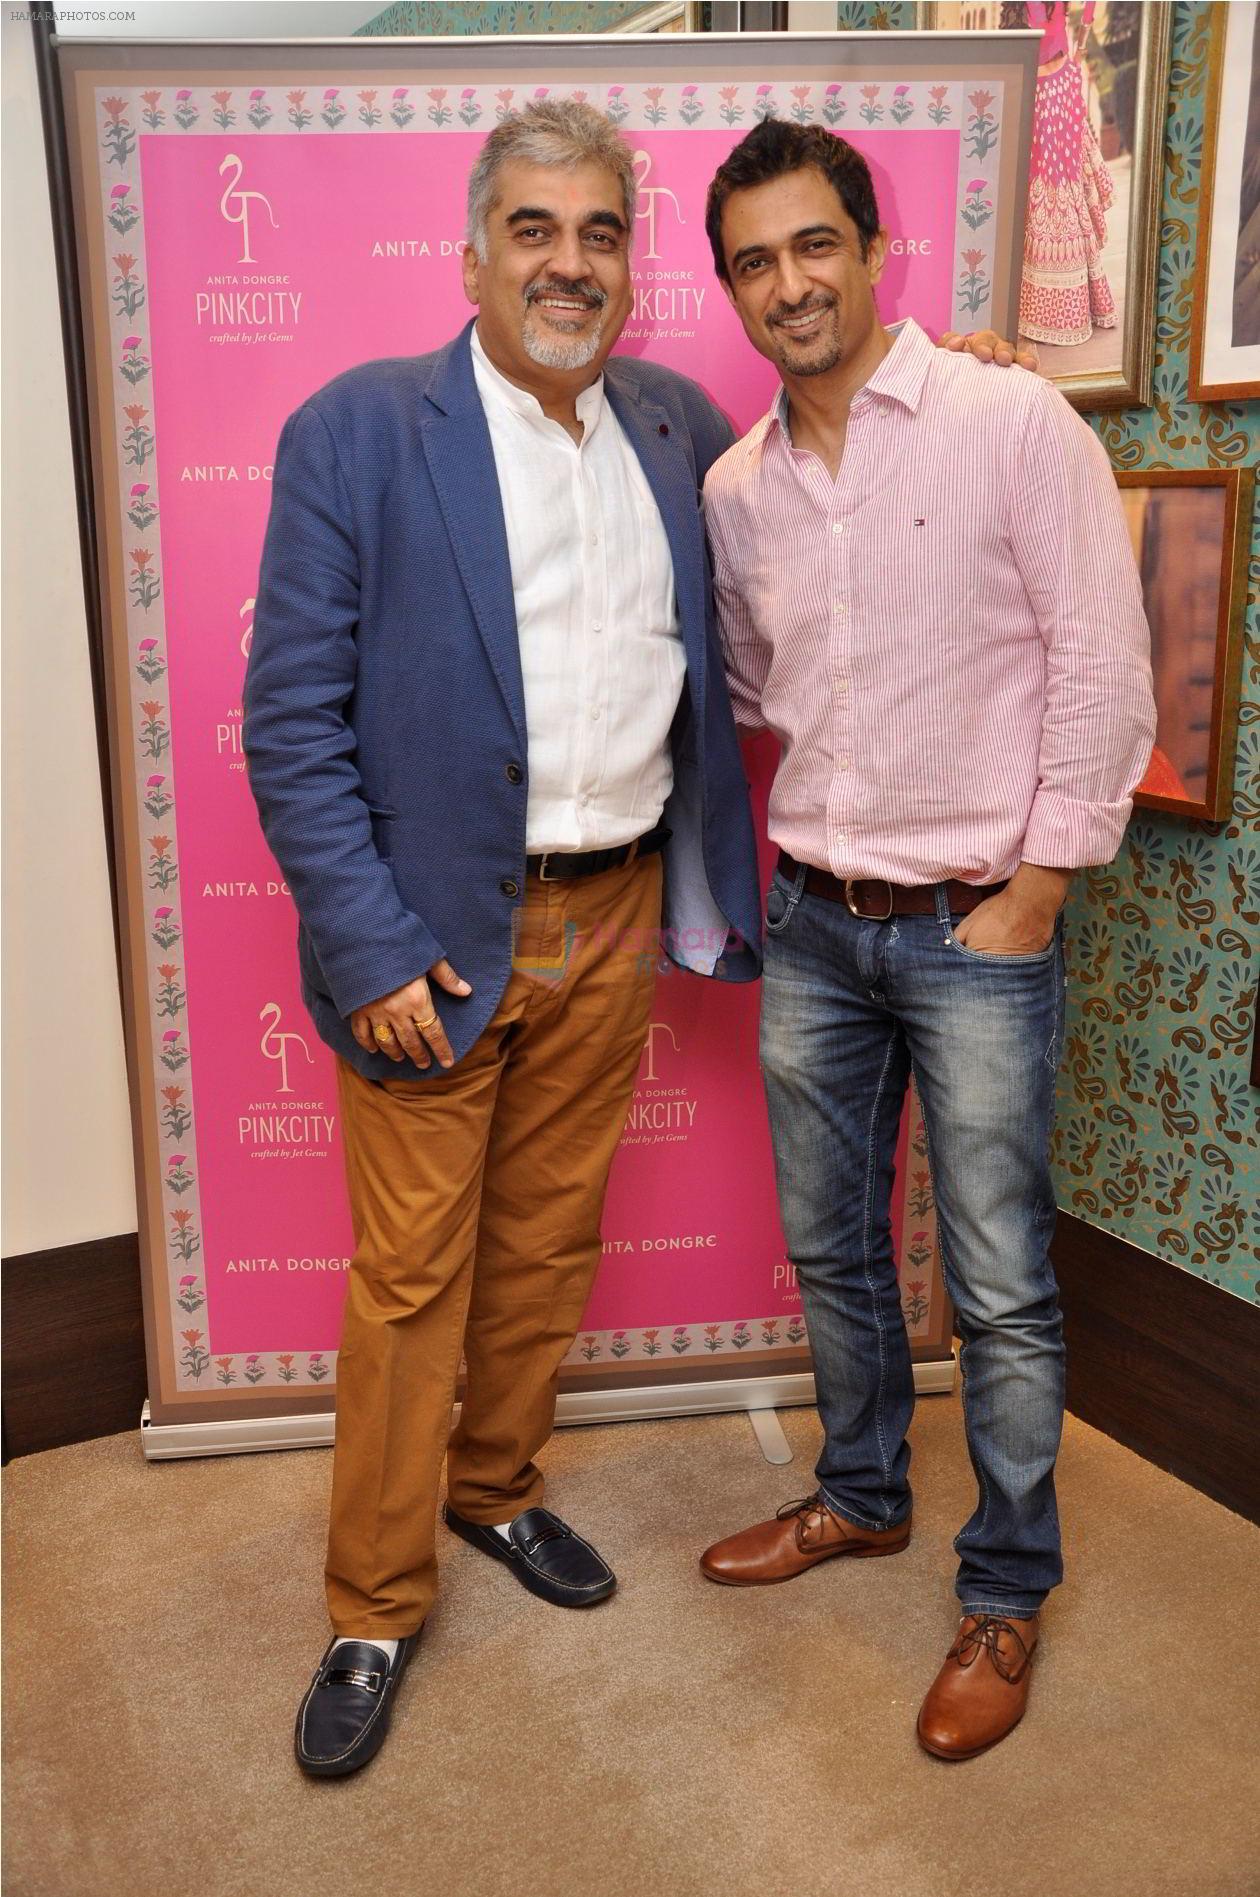 Pradeep Jethani of Jet Gems with Sanjay Suri at Anita Dongre's launch of Pinkcity in association with jet Gems in Mumbai on 13th Aug 2013